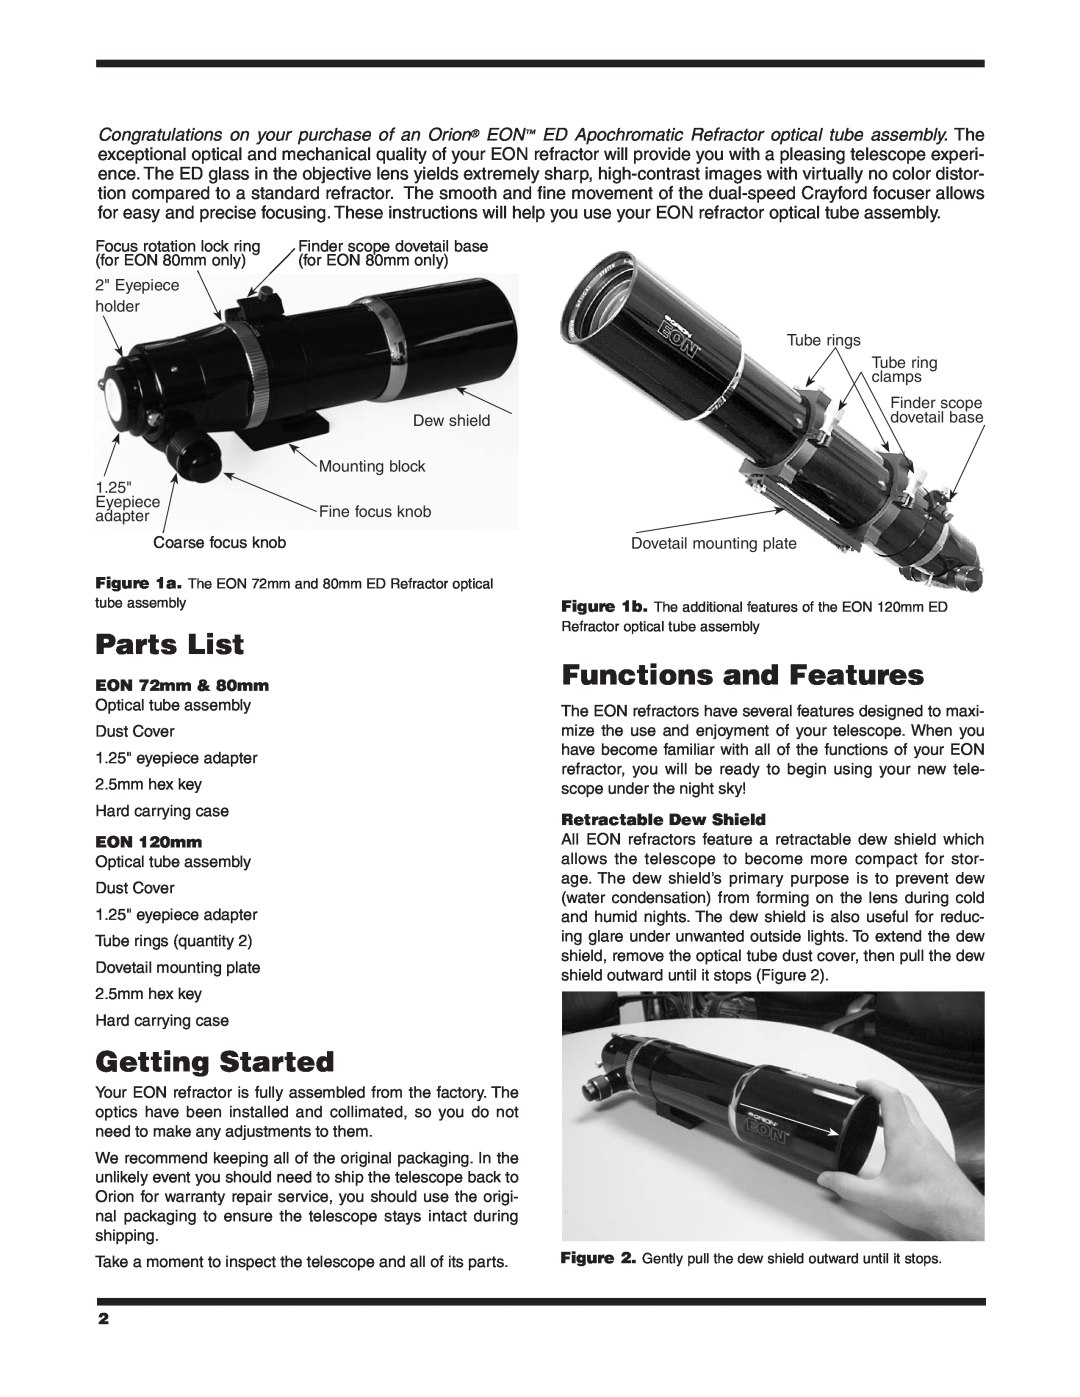 Orion #9781 EON 72MM Parts List, Getting Started, Functions and Features, EON 72mm & 80mm Optical tube assembly 